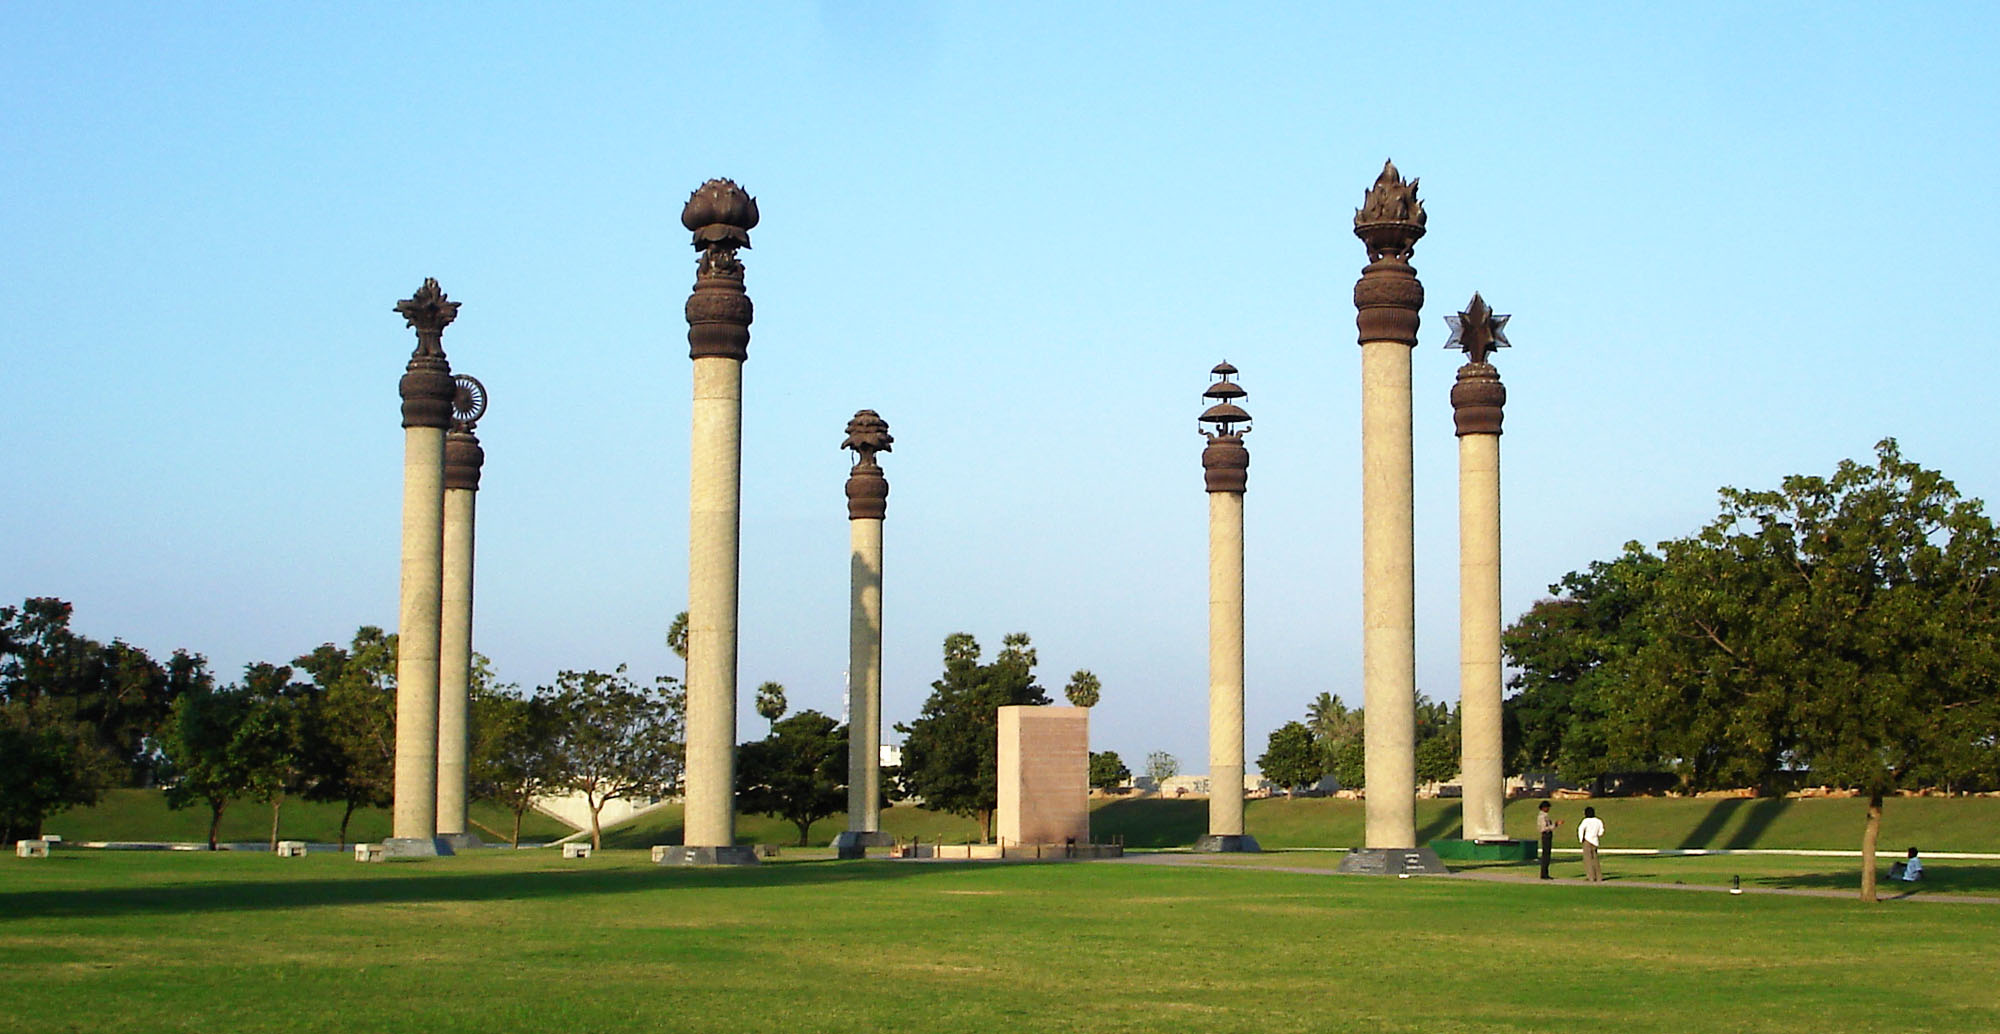 The Rajiv Gandhi Memorial at the site where the former prime minister was assassinated at Sriperumbudur in Chennai. (Wikimedia Commons)